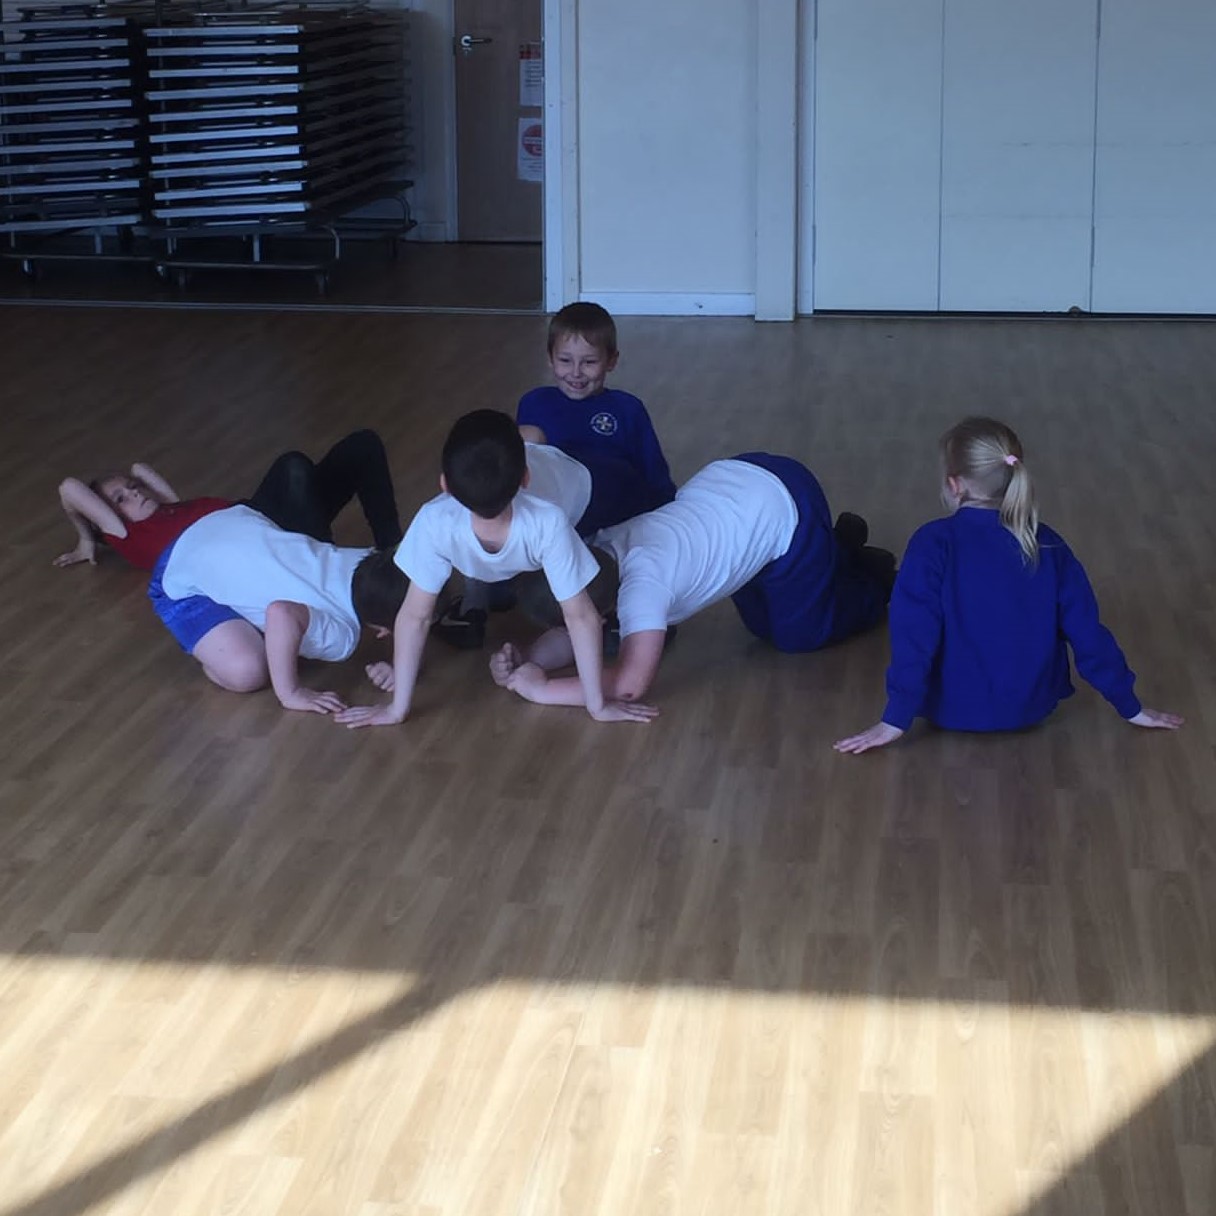 https://www.therightstepdc.co.uk/wp-content/uploads/2022/04/SQ-Snodland-Educating-Dance-TRS-Jenny-Space.jpg